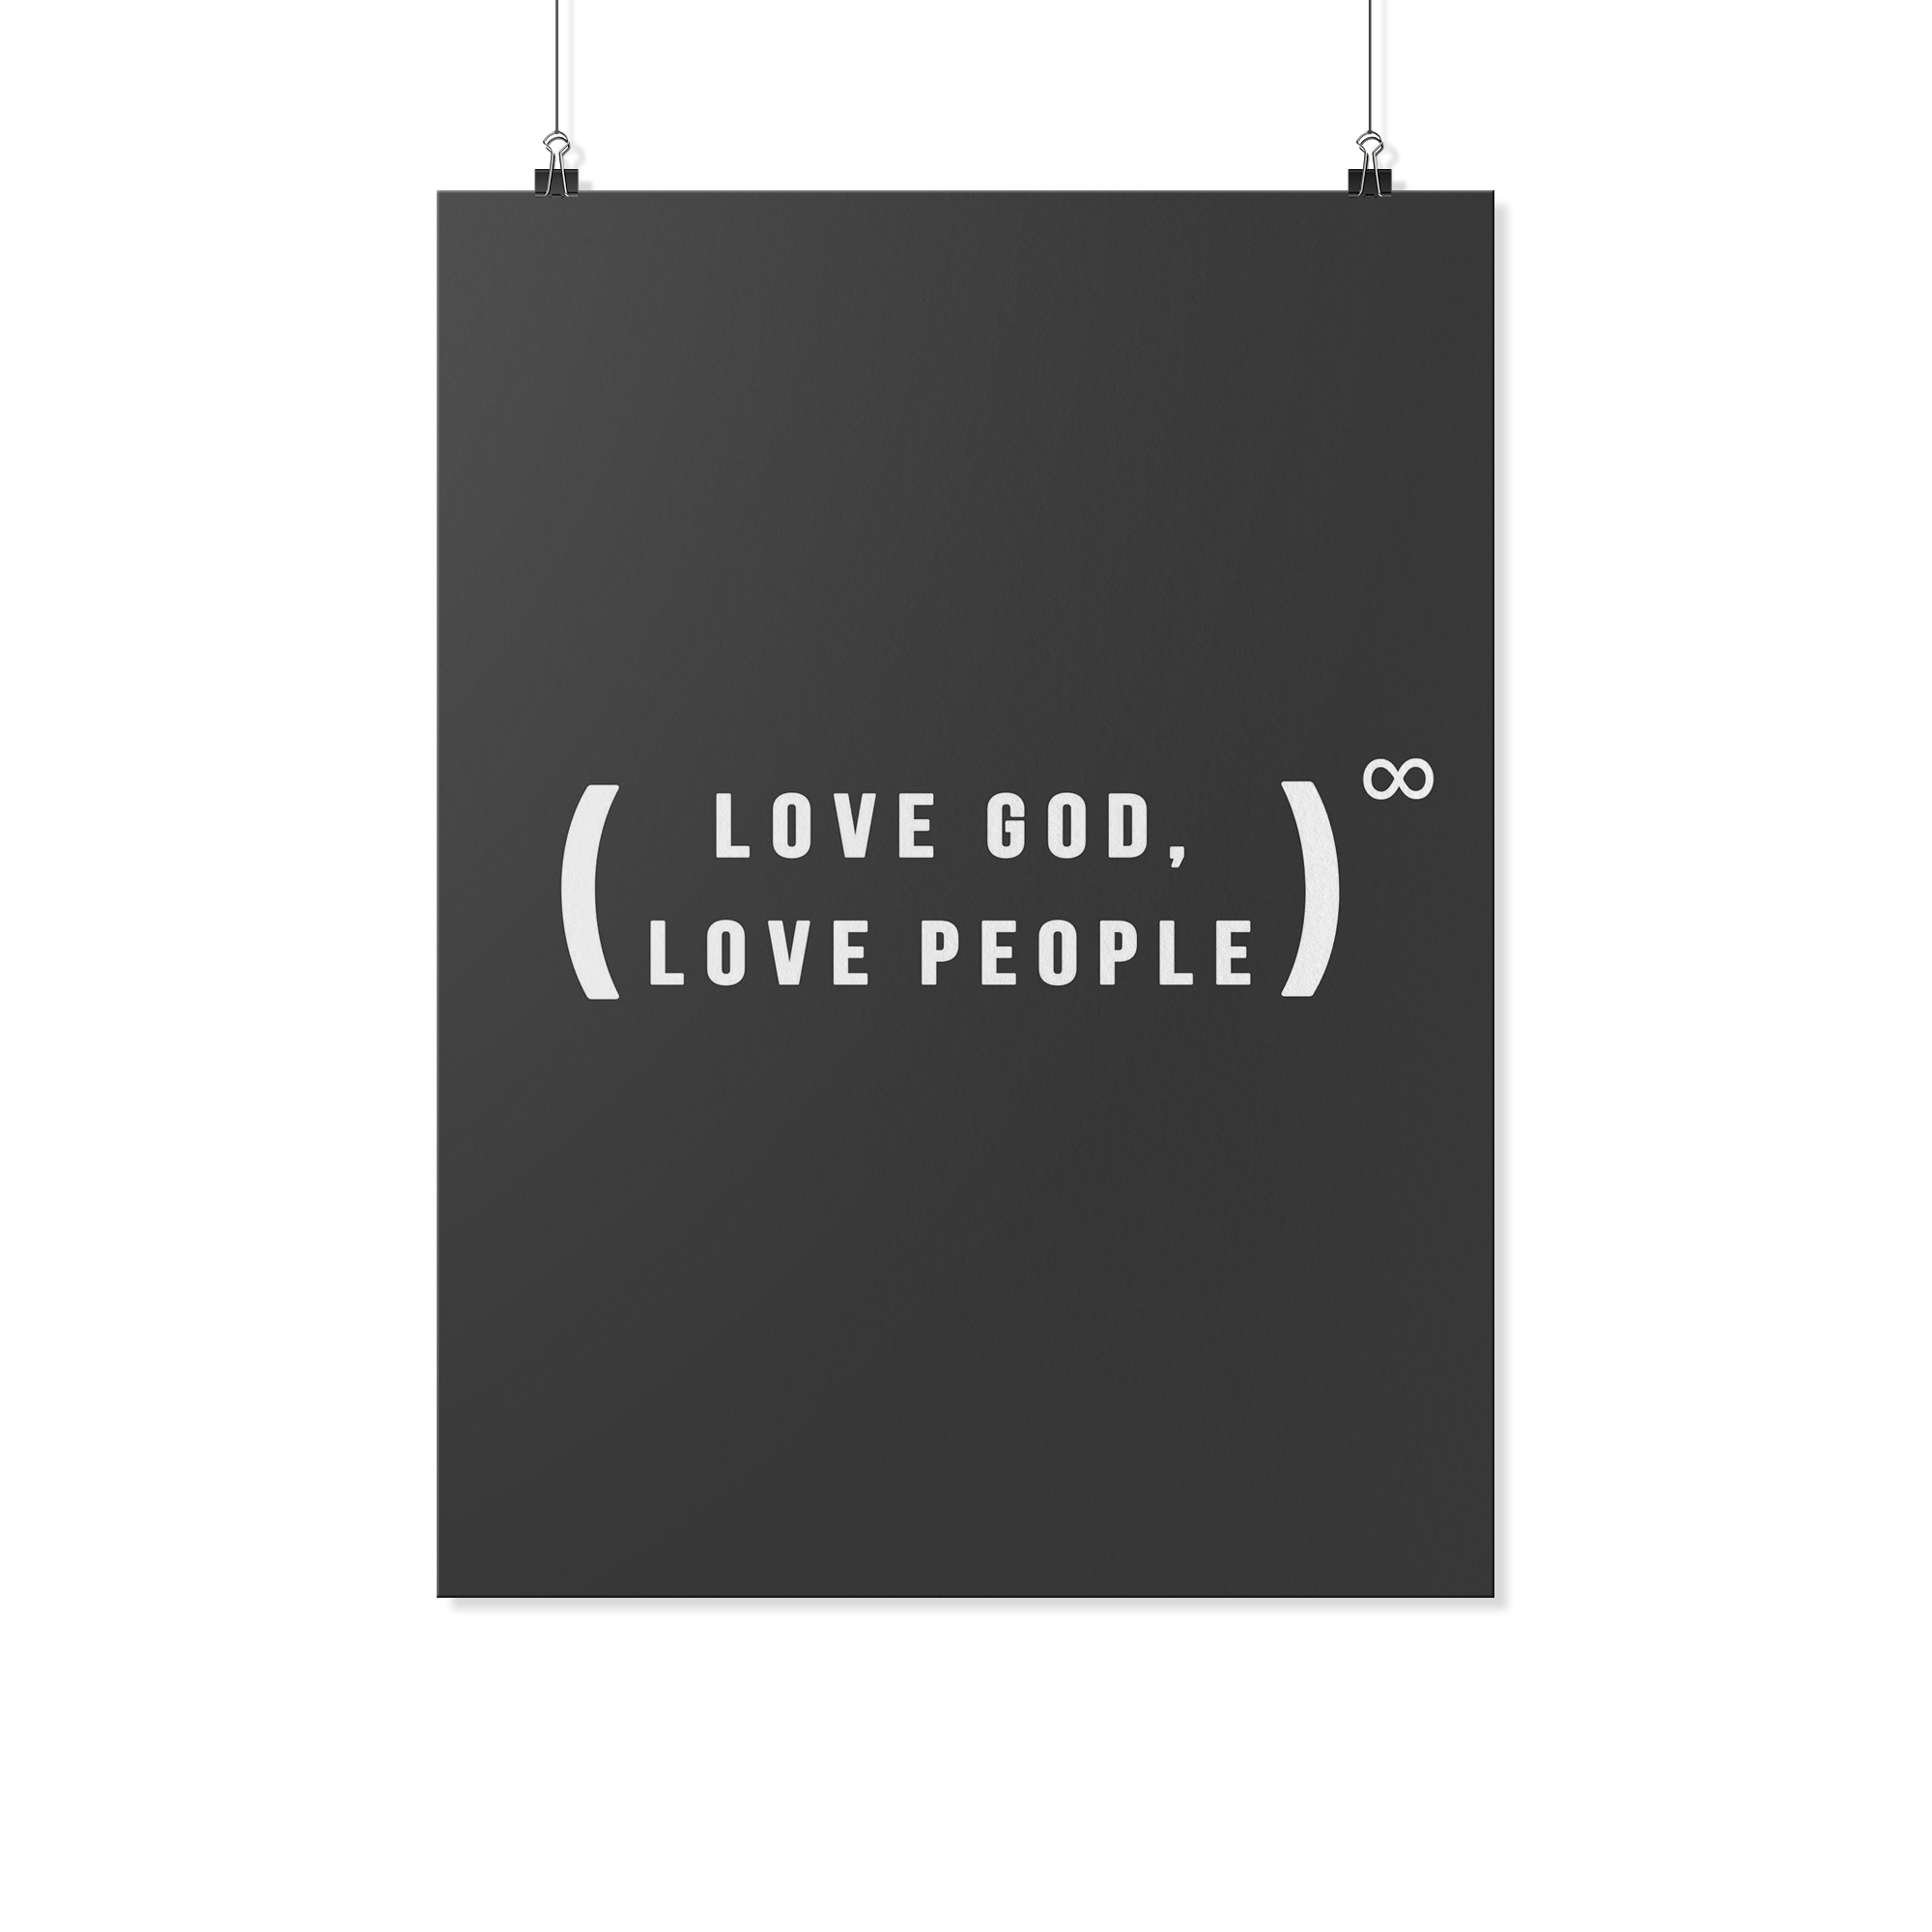 Love God, Love People (Wall Poster)